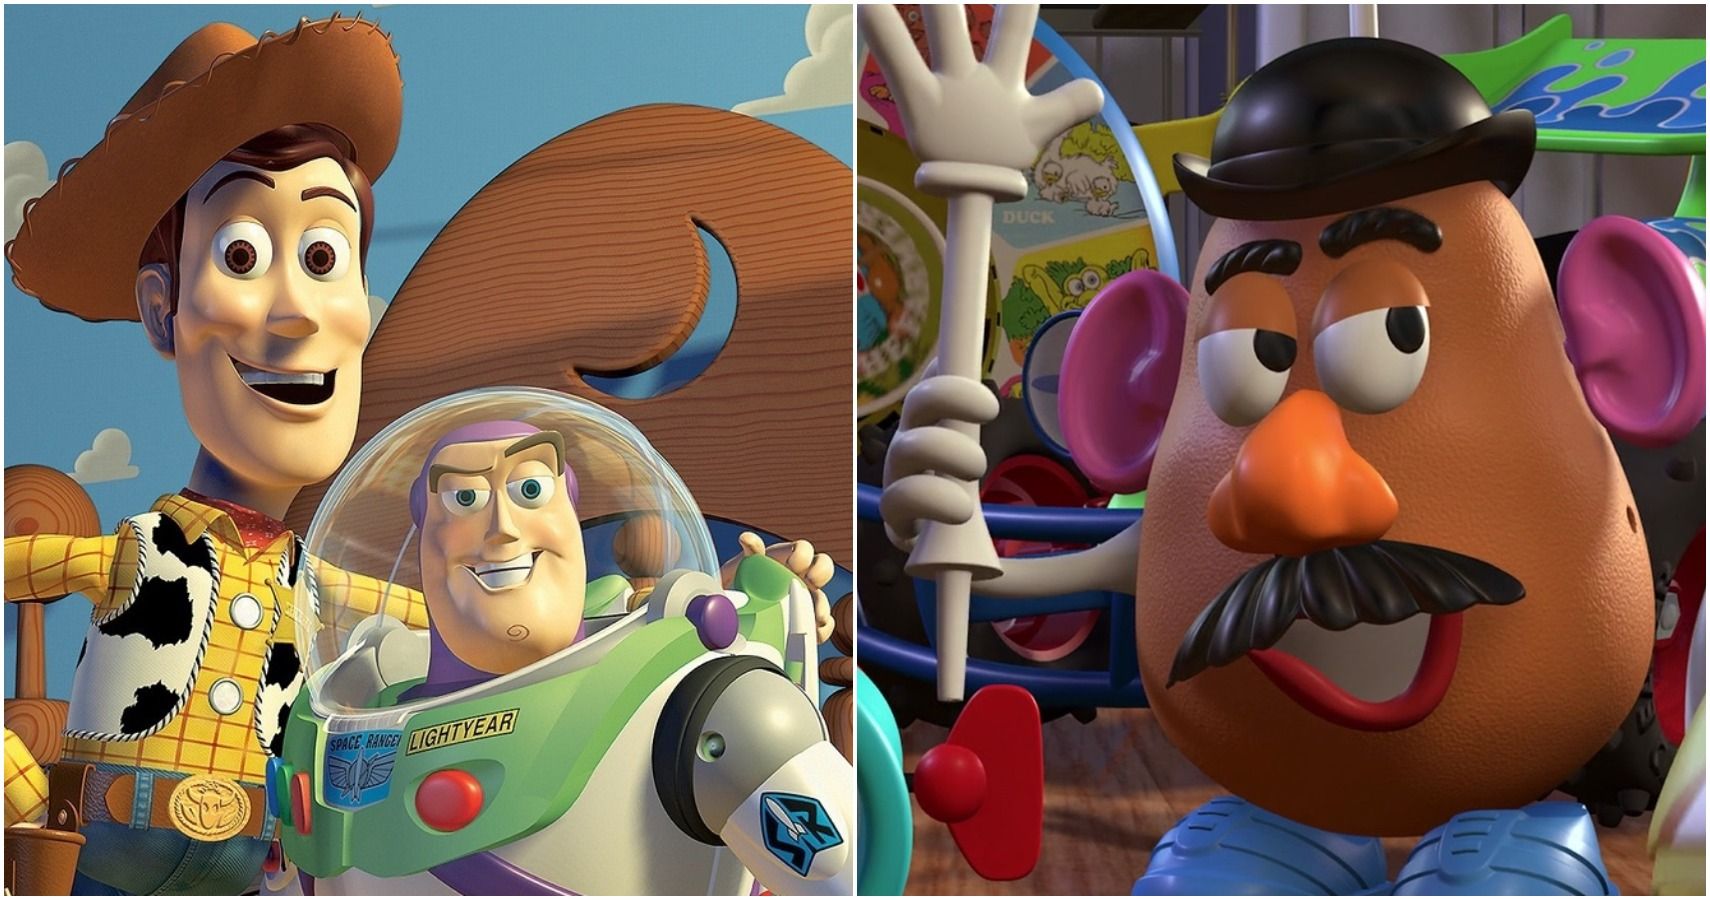 Pixars Toy Story 5 Of The Funniest Moments (& 5 Of The Saddest)